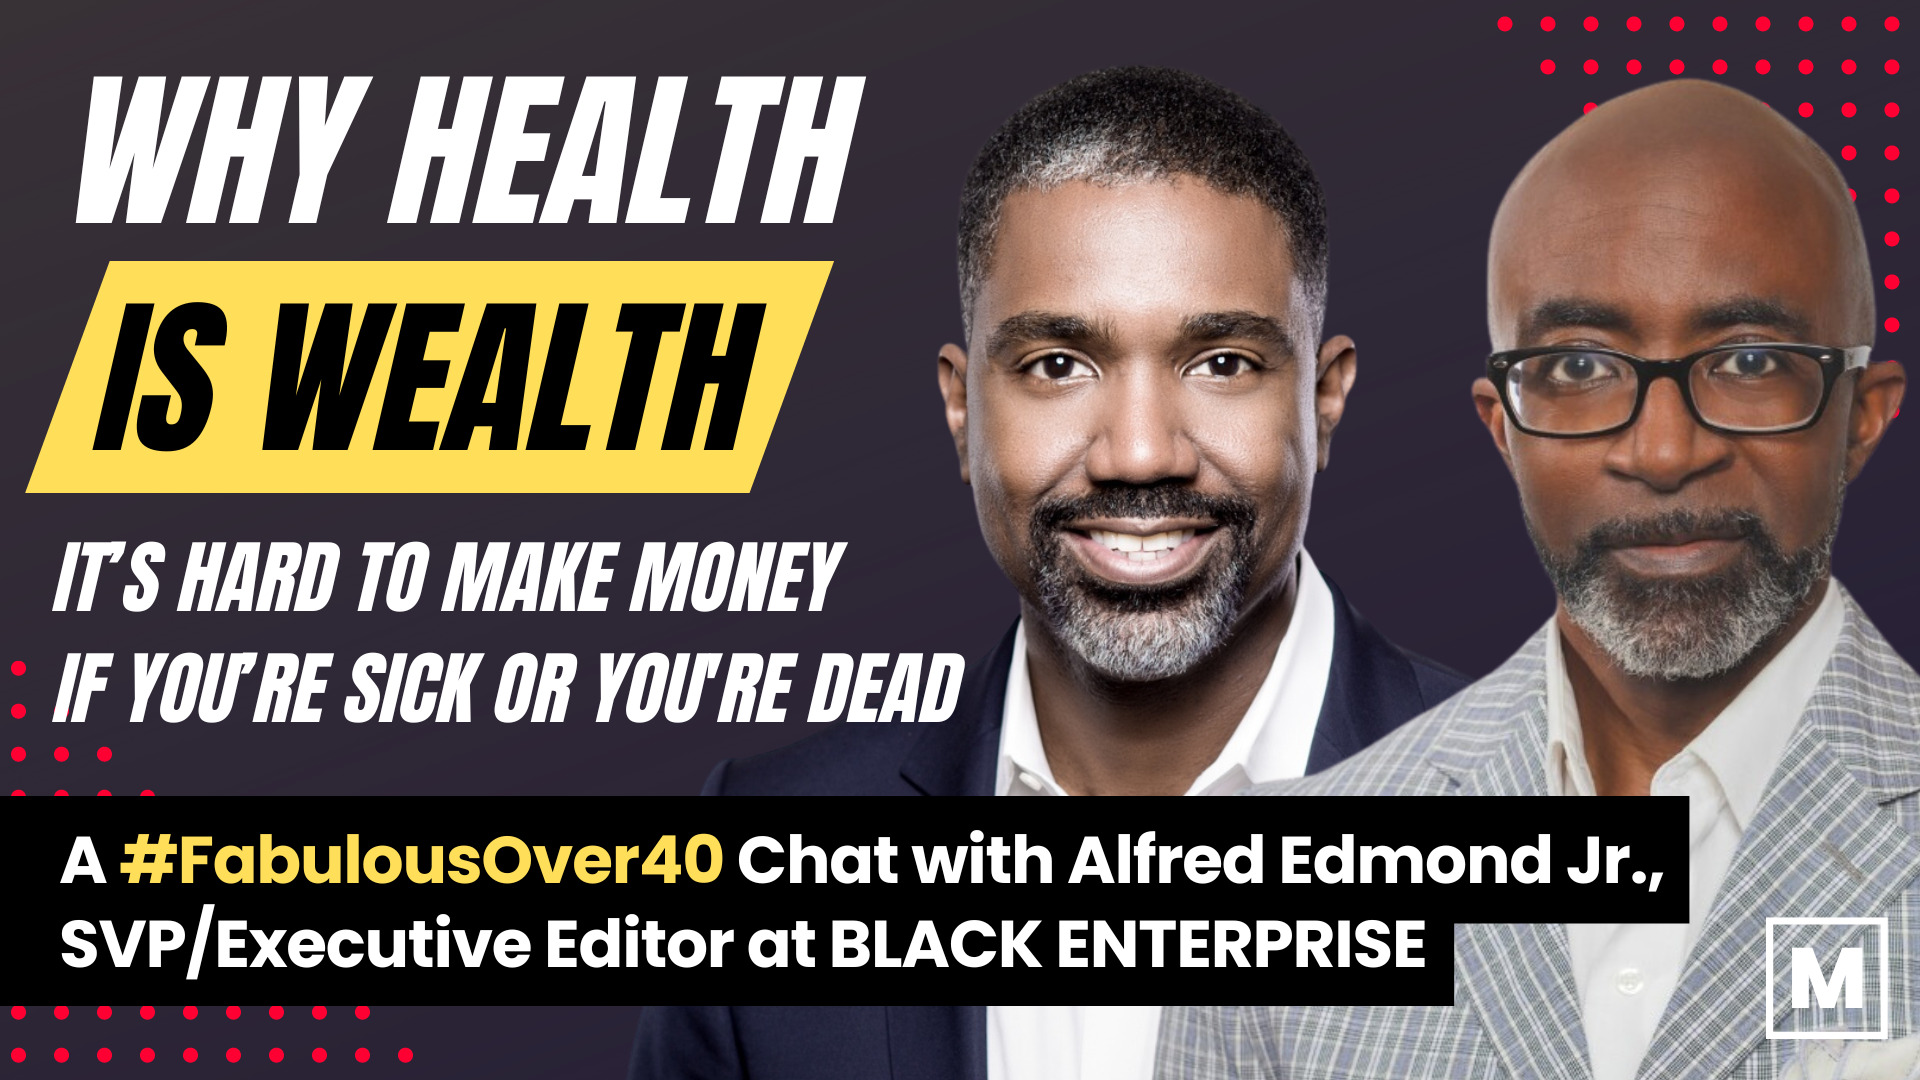 Why Health is Wealth: A Chat with Alfred Edmond Jr. of Black Enterprise